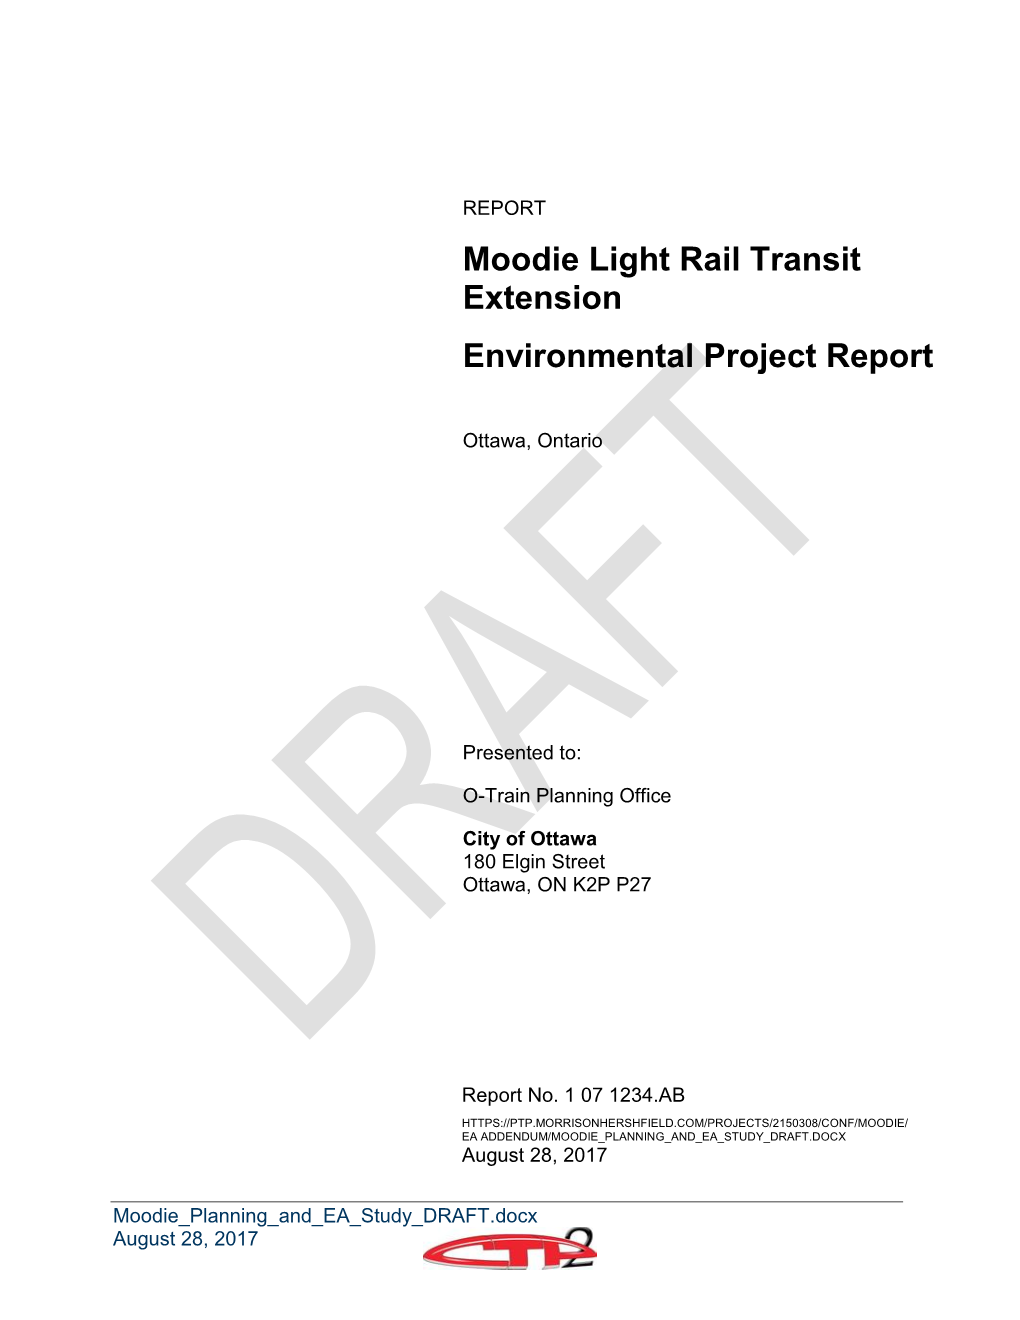 Moodie Light Rail Transit Extension Environmental Project Report